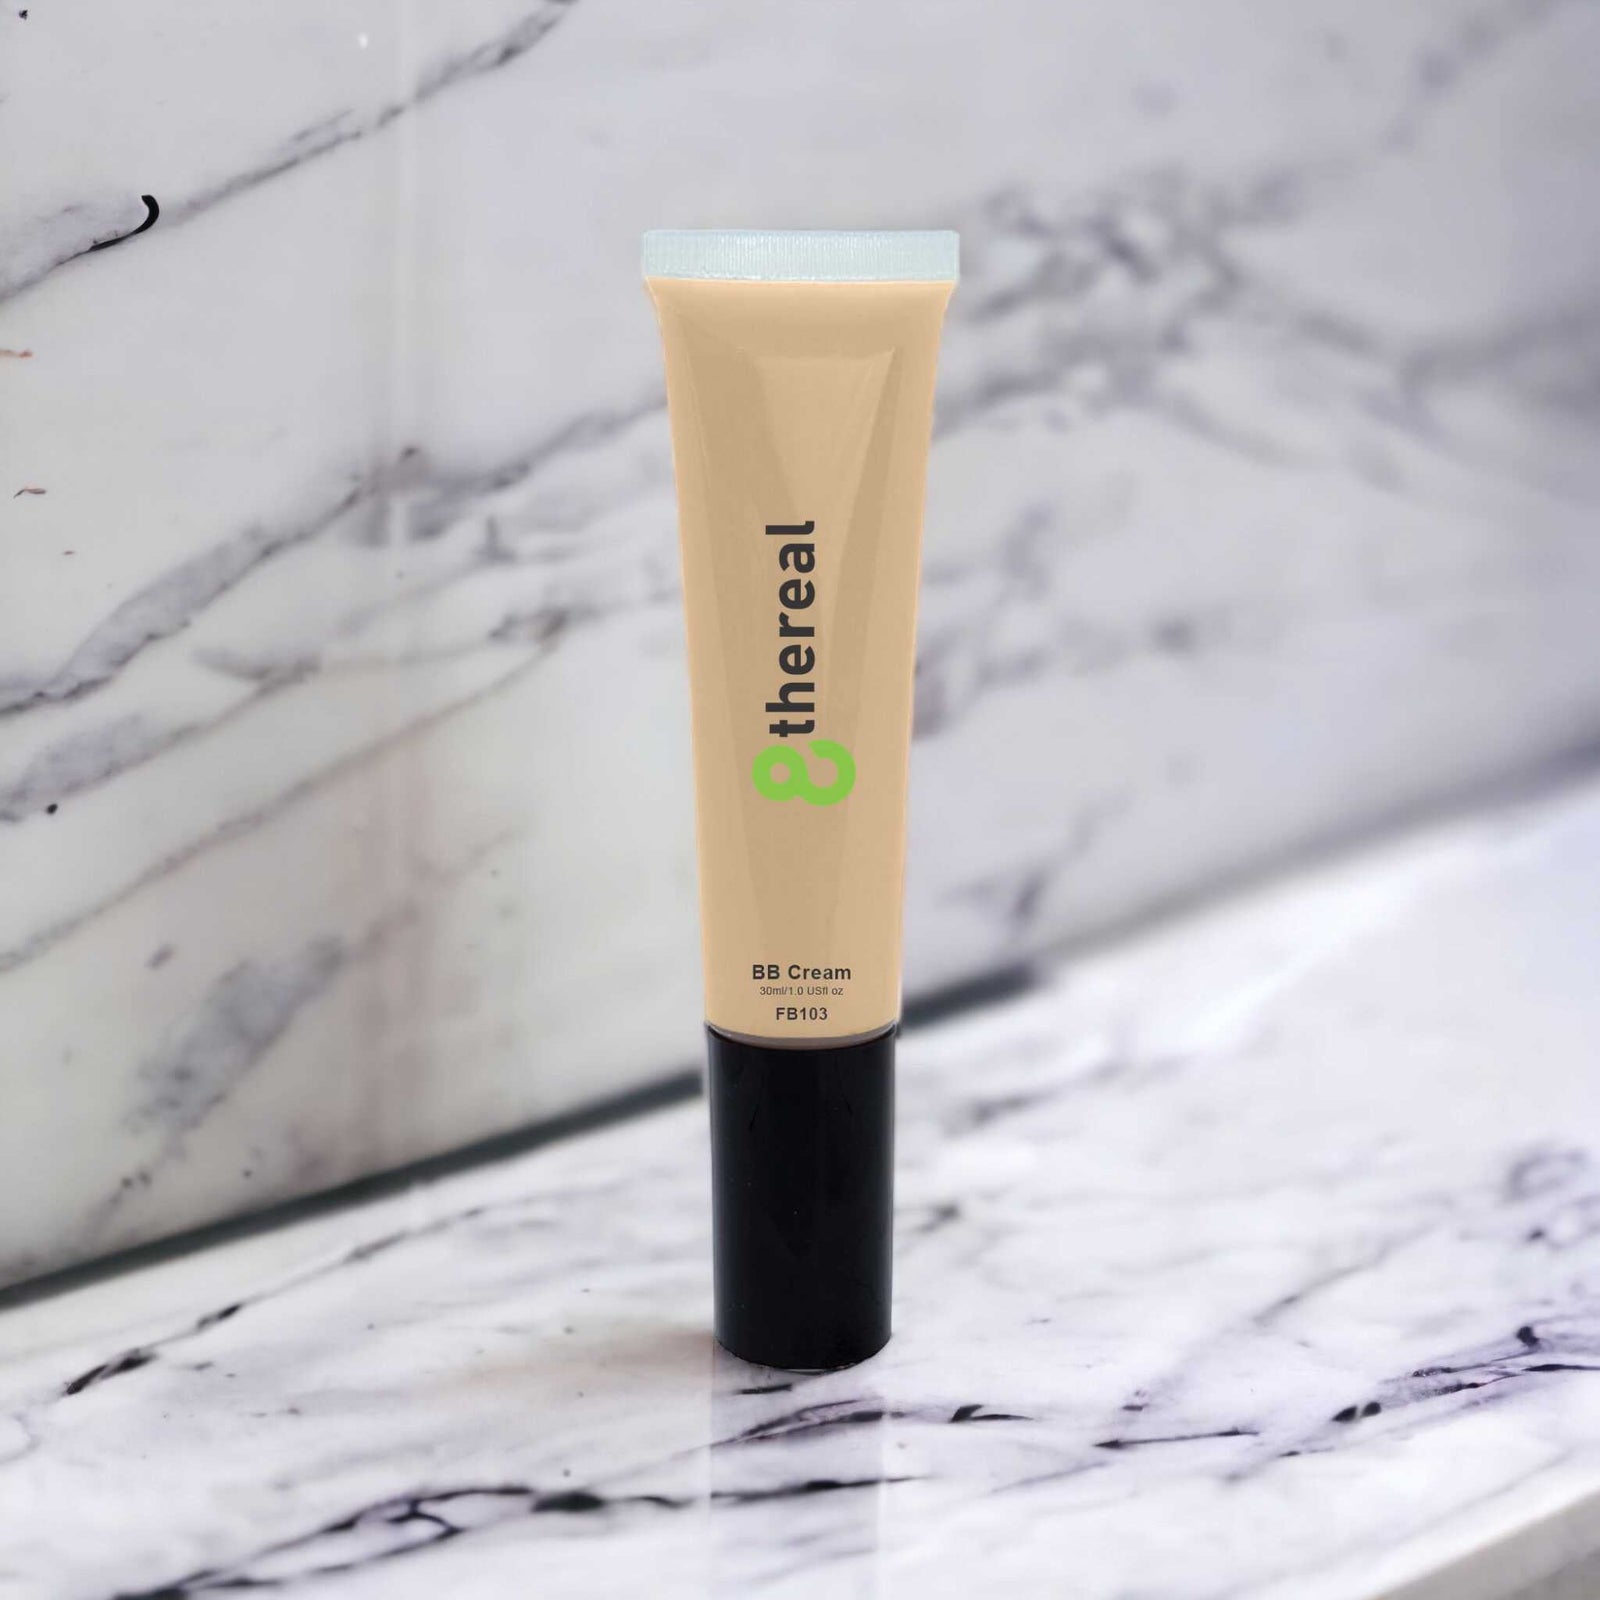 BB Cream + Is Good For Daily Use | 8thereal | Marble tile backdrop with Vegan BB Cream by 8thereal